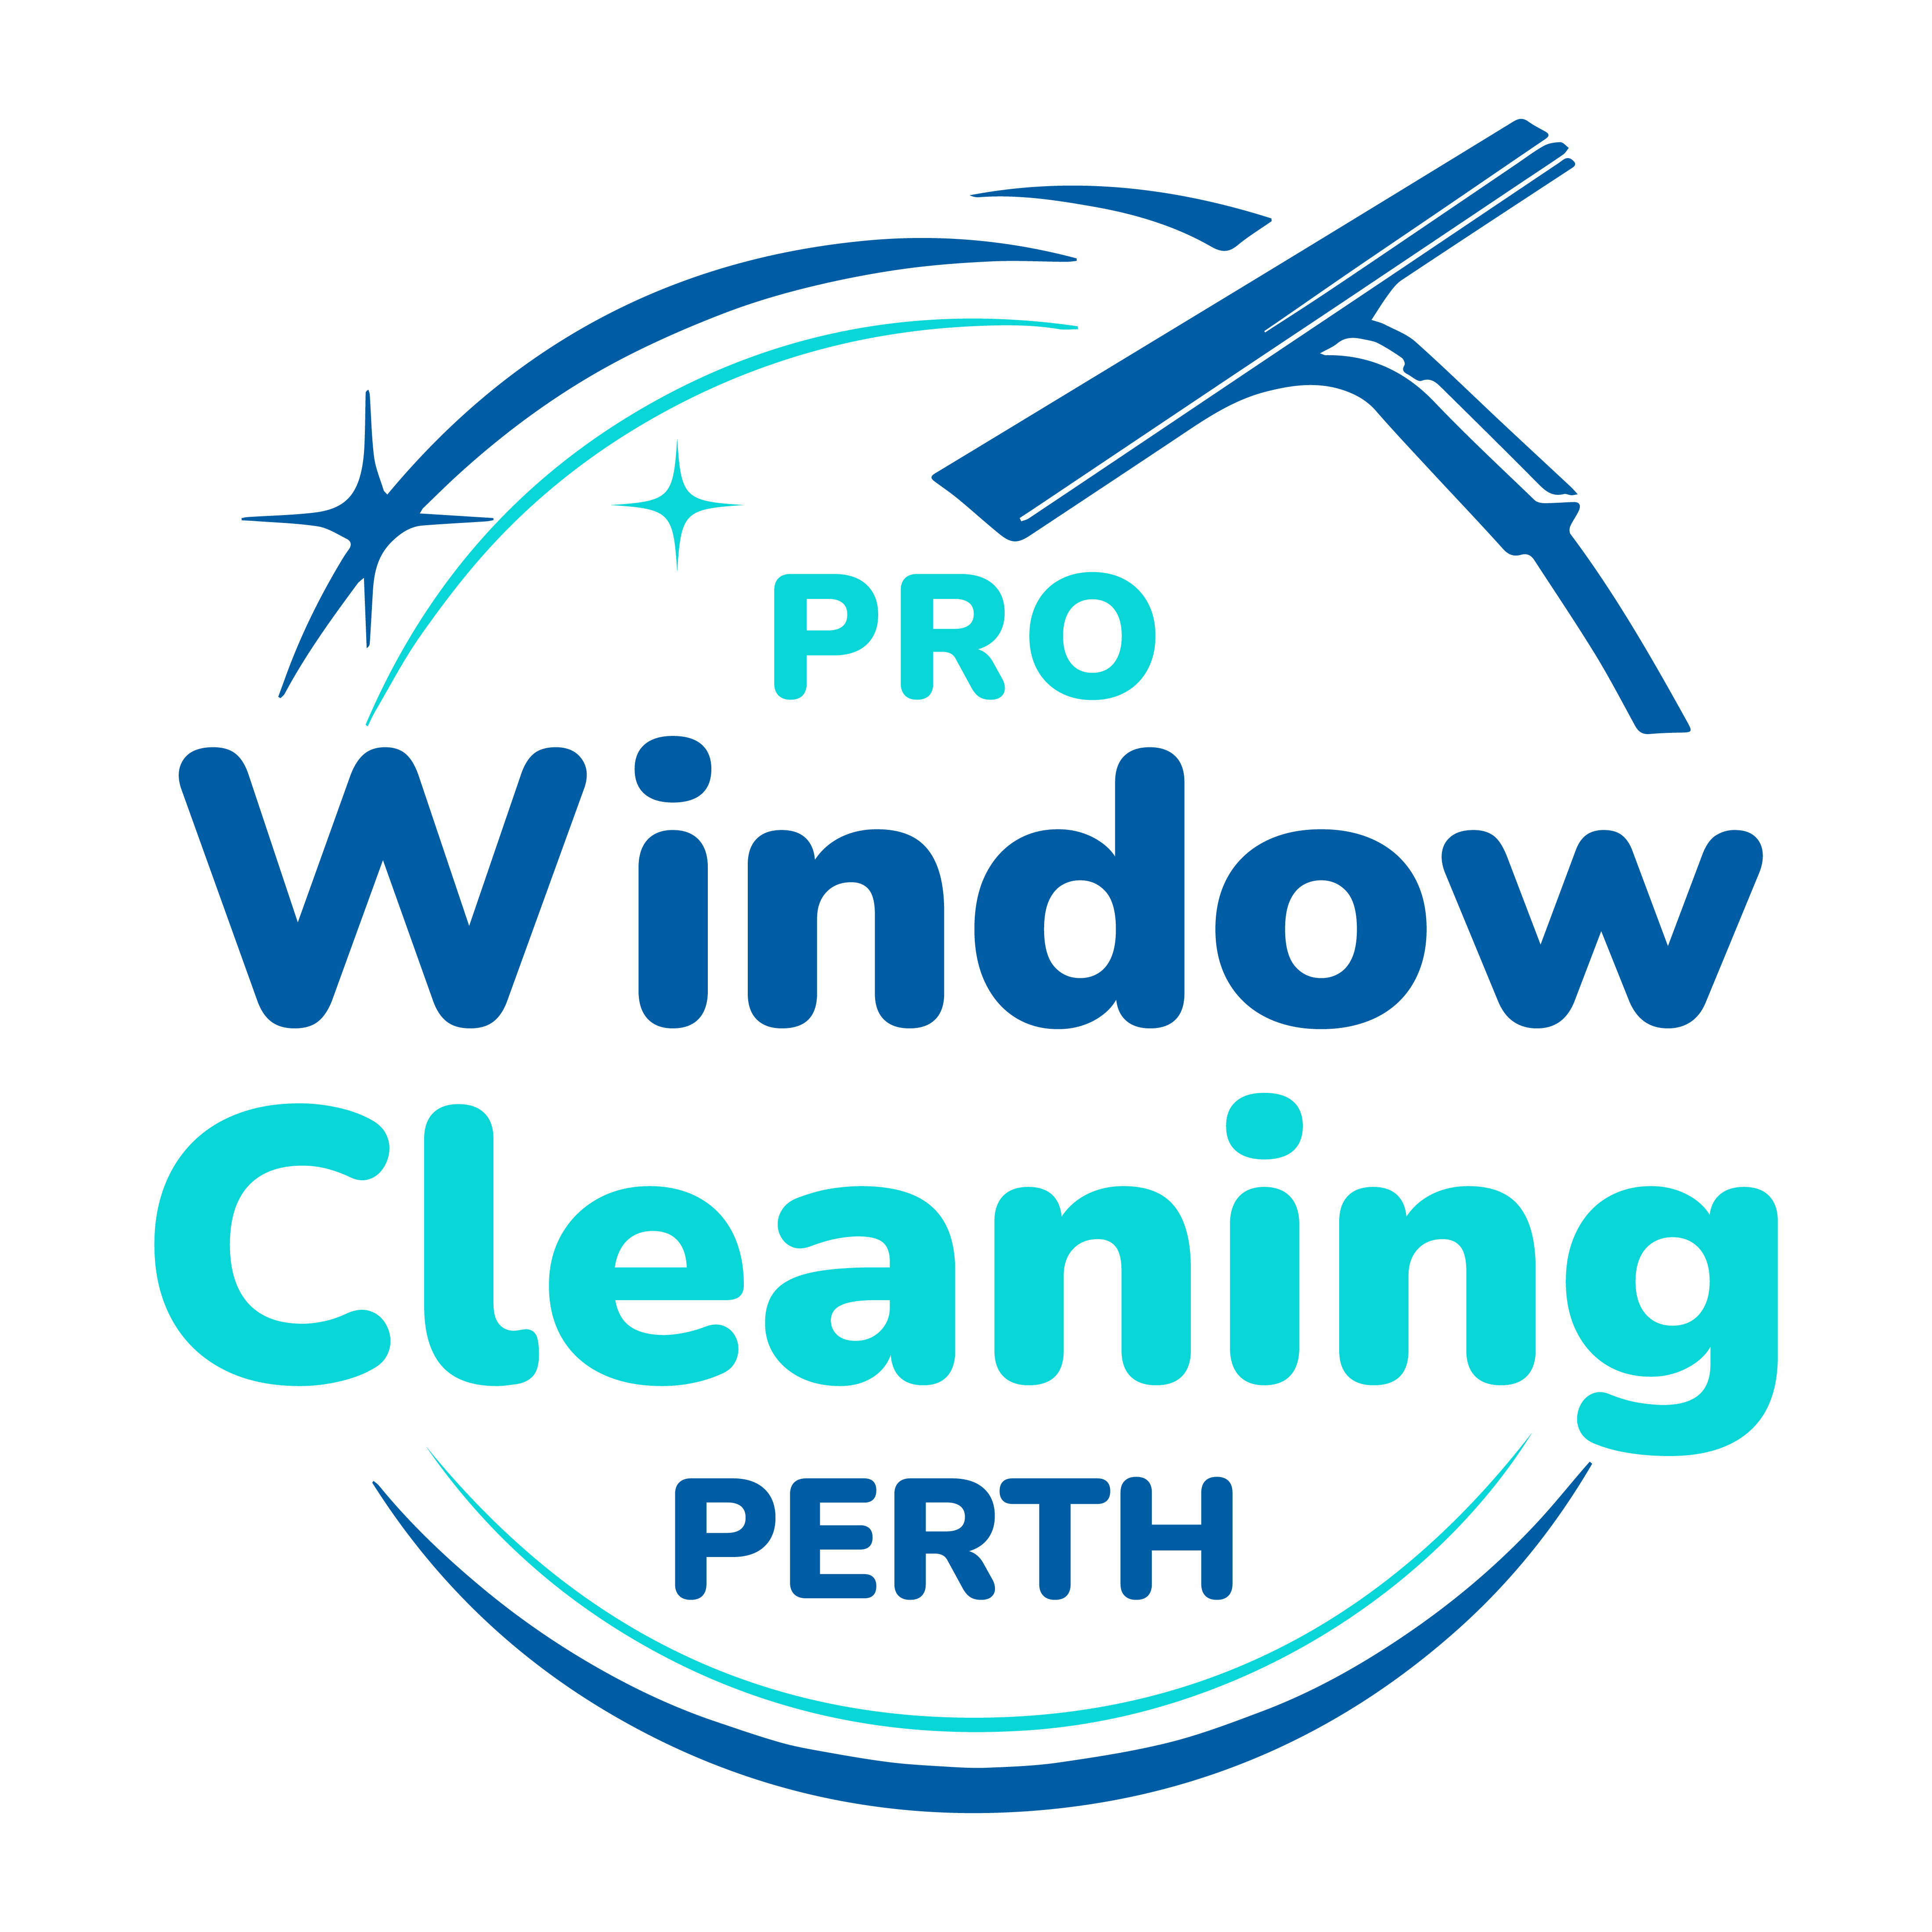 Pro Window Cleaning Perth